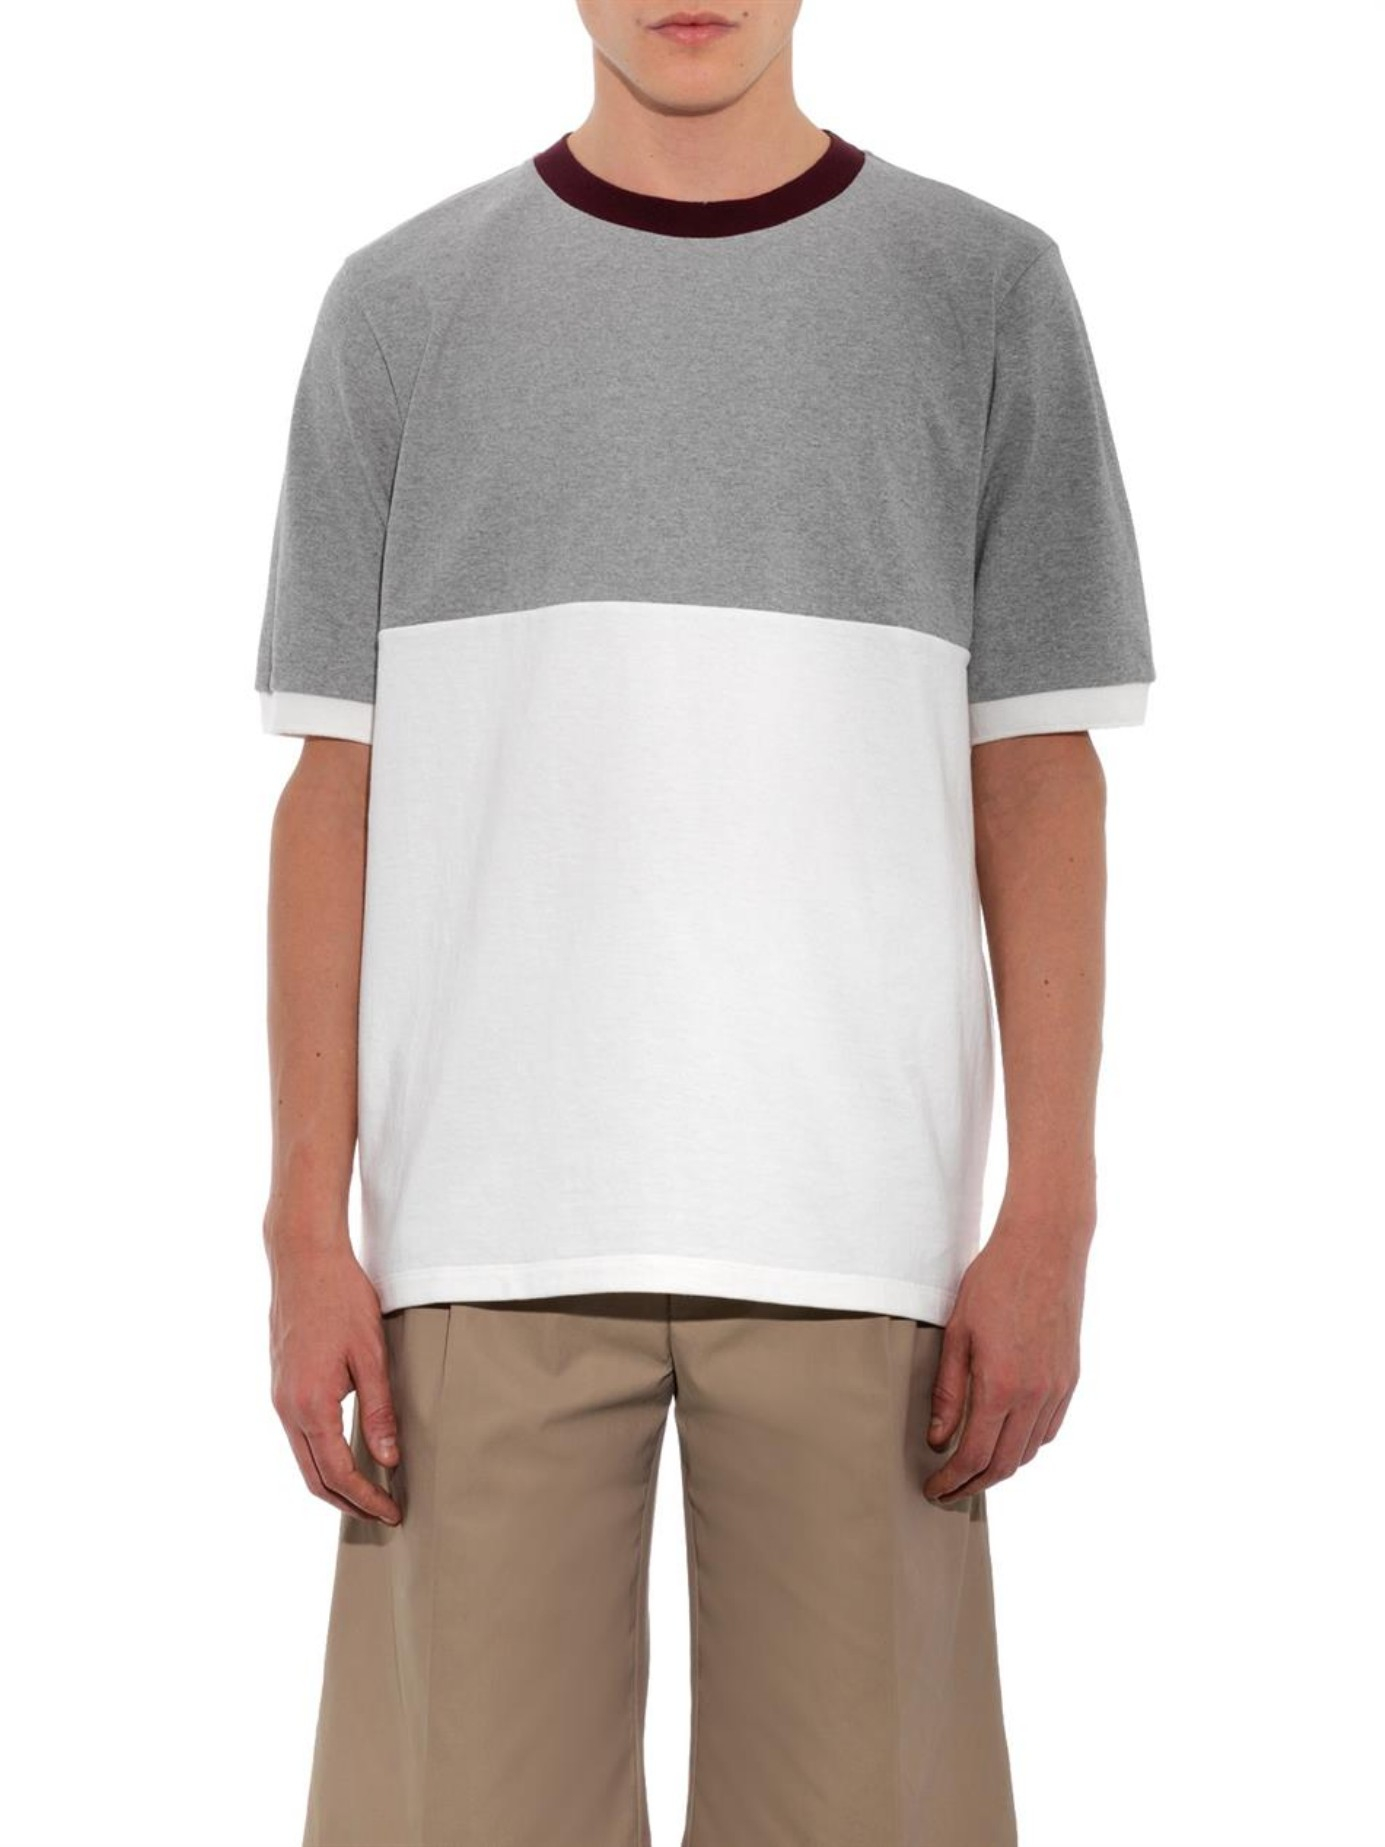 Lyst - Marni Color-Blocked Jersey T-Shirt in Gray for Men